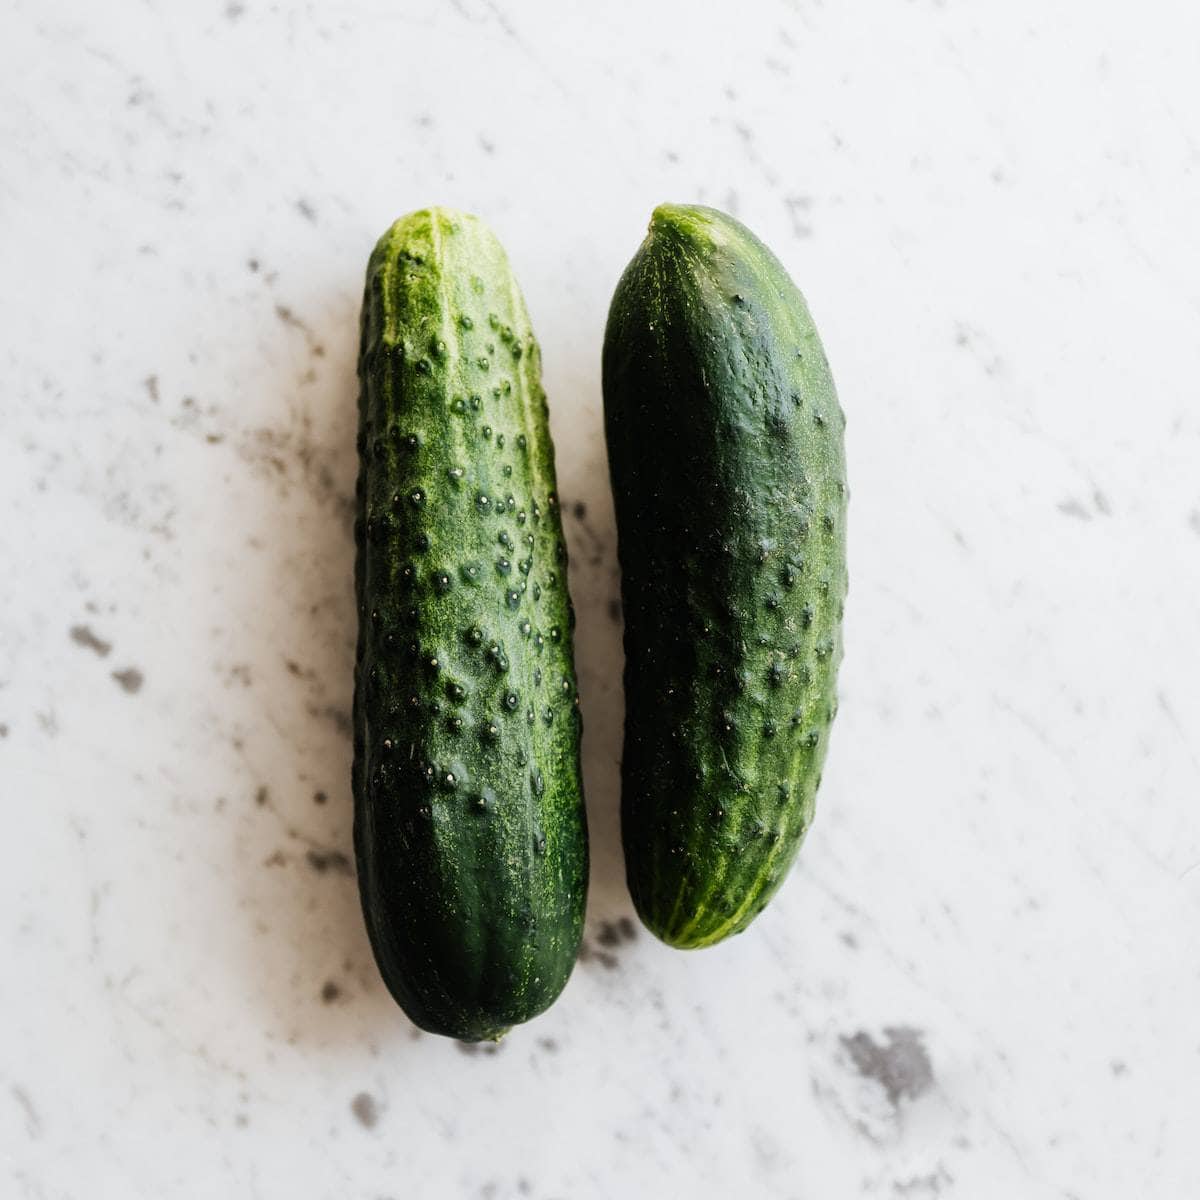 Two elongated green vegetables on a marbled table